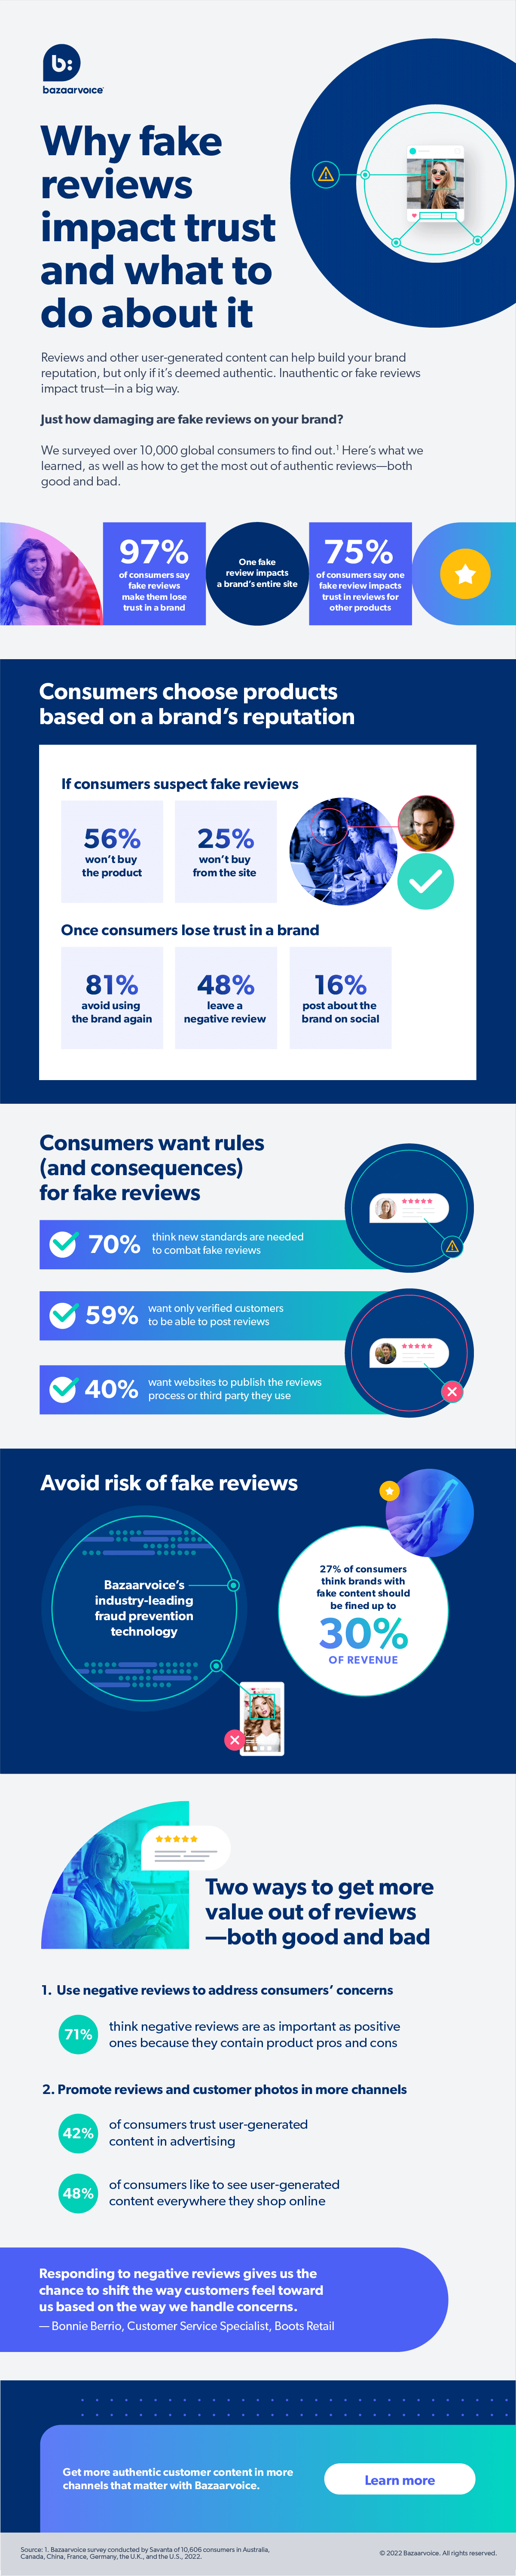 Why fake reviews impact trust and what to do about it